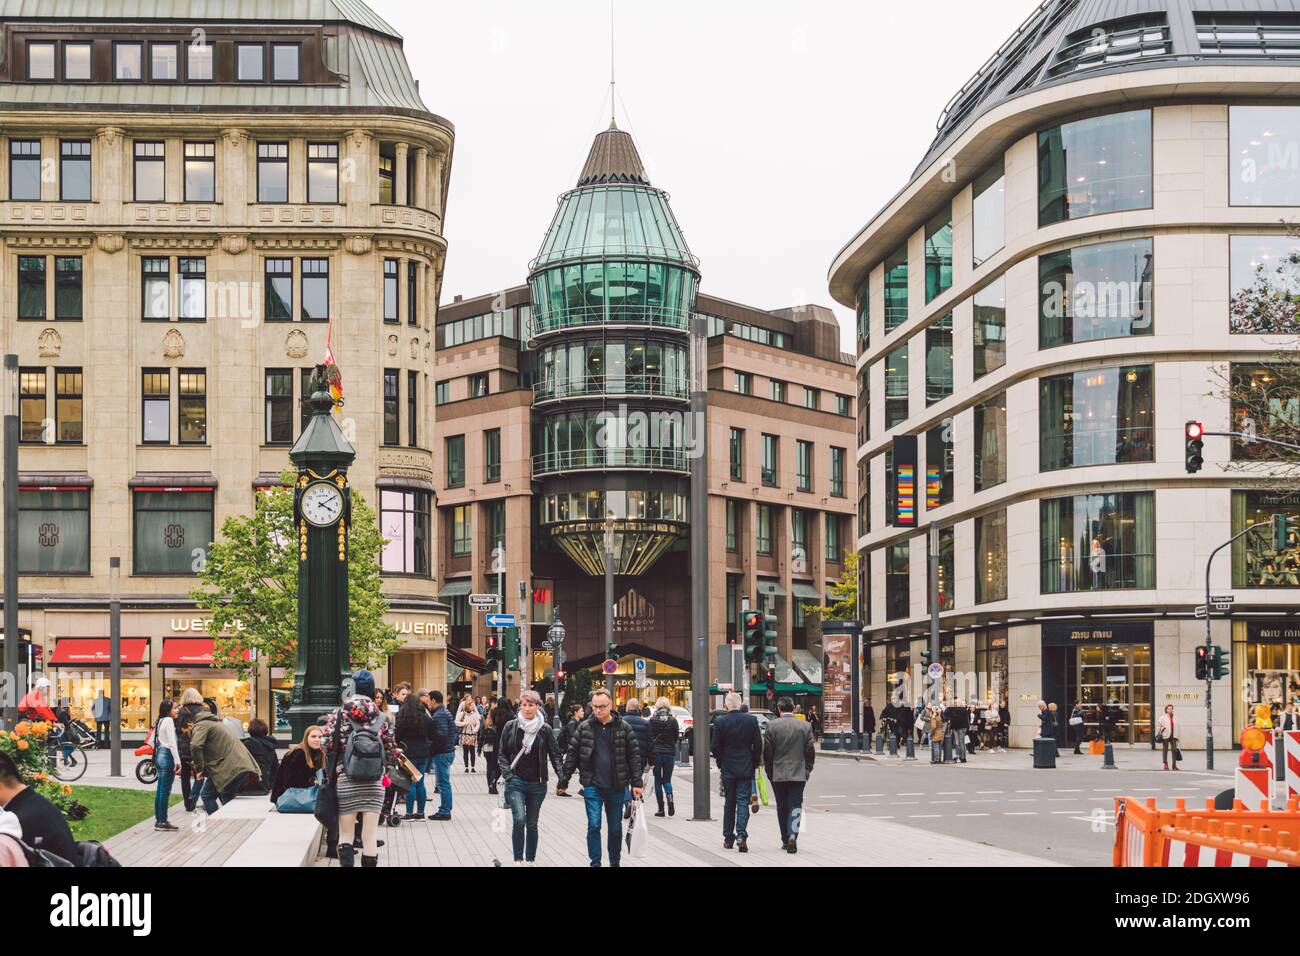 Shopping mall dusseldorf germany High Resolution Stock Photography and  Images - Alamy